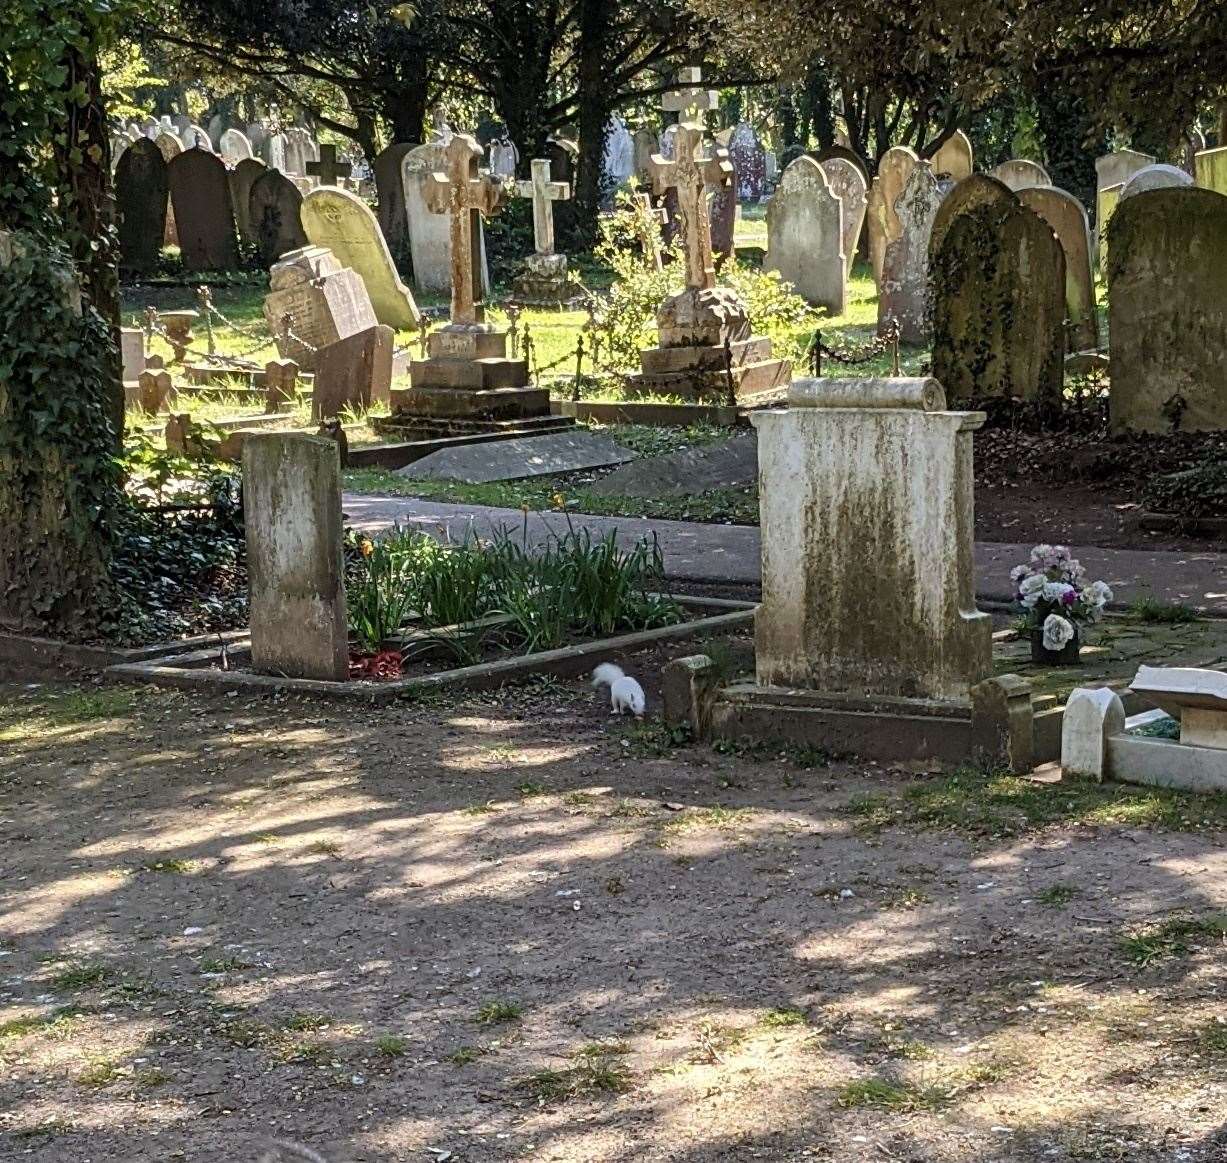 The white squirrel in Margate Cemetery